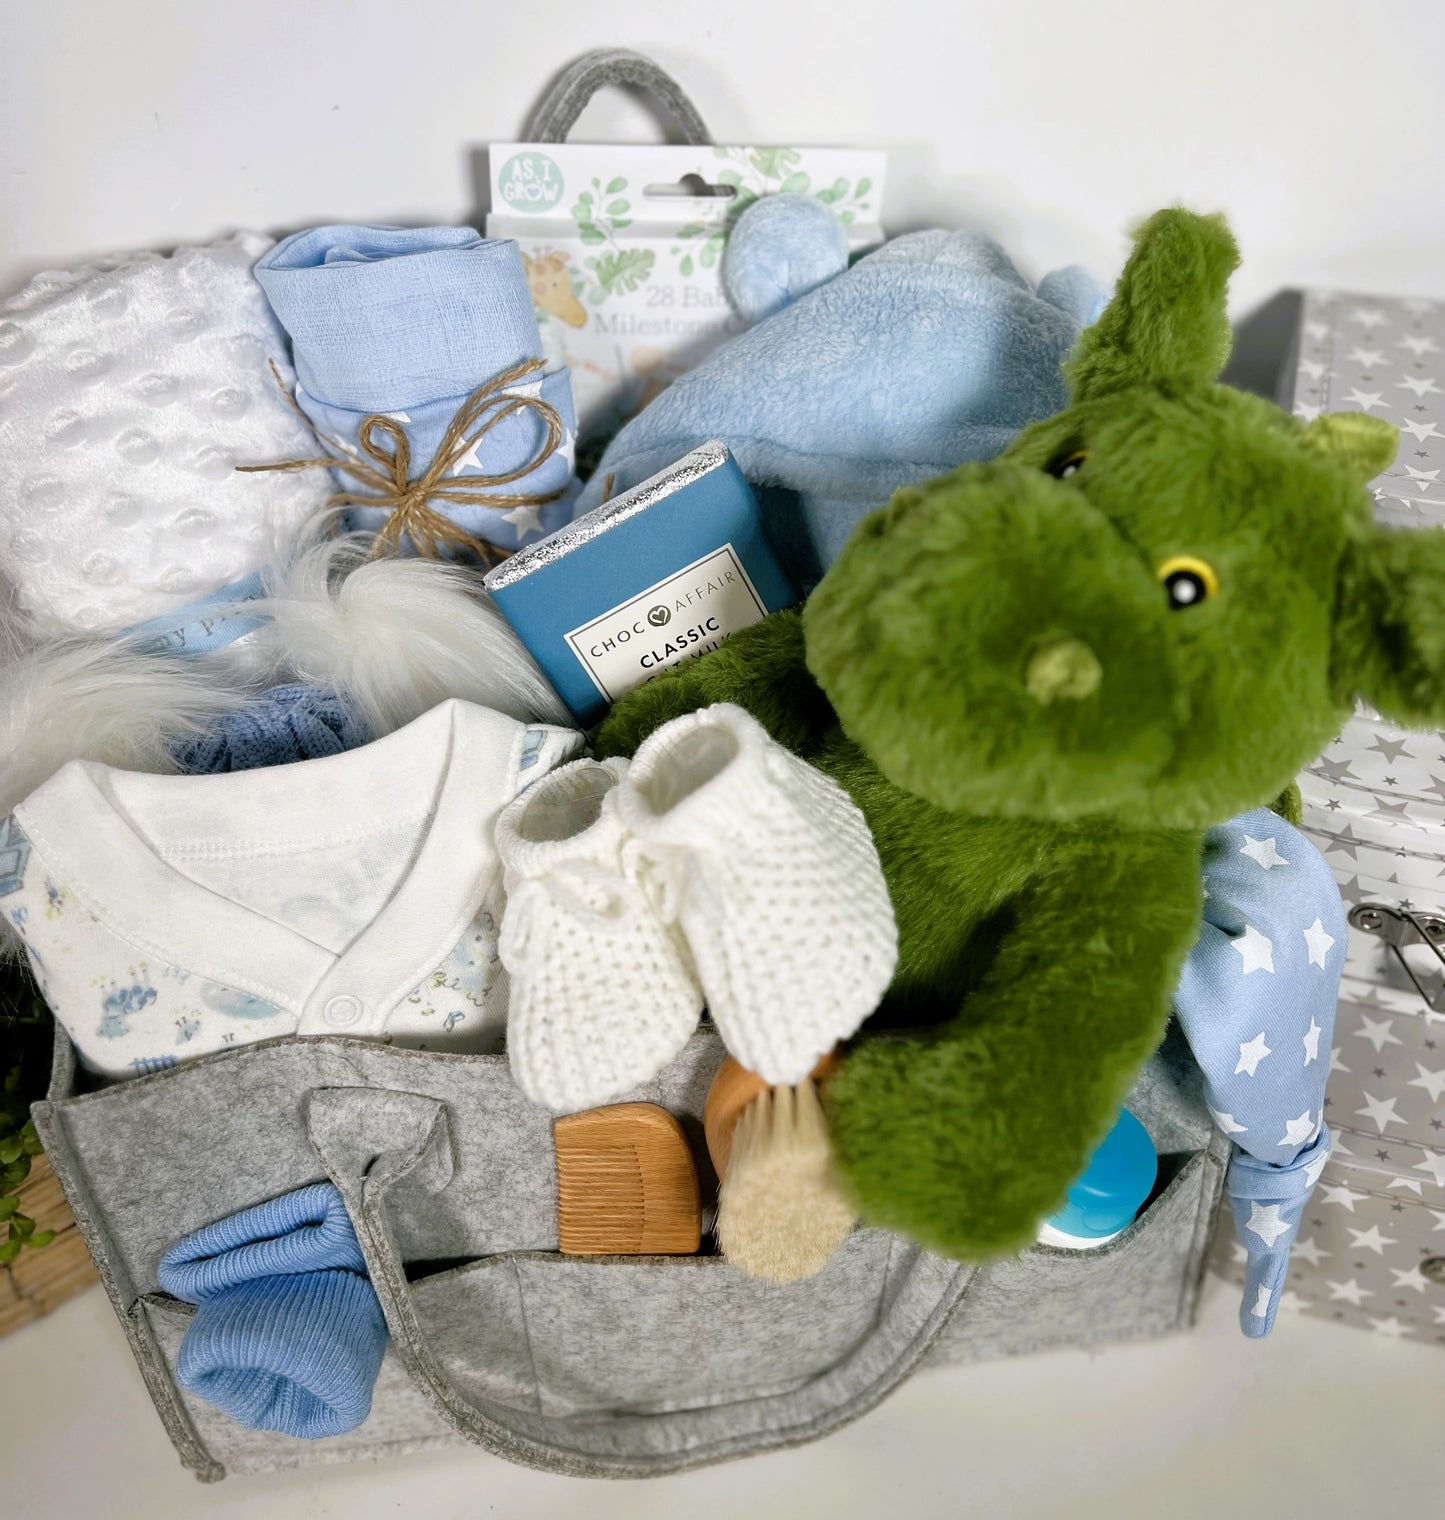  grey nappy caddy containing a green dragon soft baby toy, a blue and white baby sleepsuit, a blue and white baby pompom hat, a soft white baby blankets, a blue baby dressing gown,a ziggle not hat and Ziggle baby bib in blue and white stars.